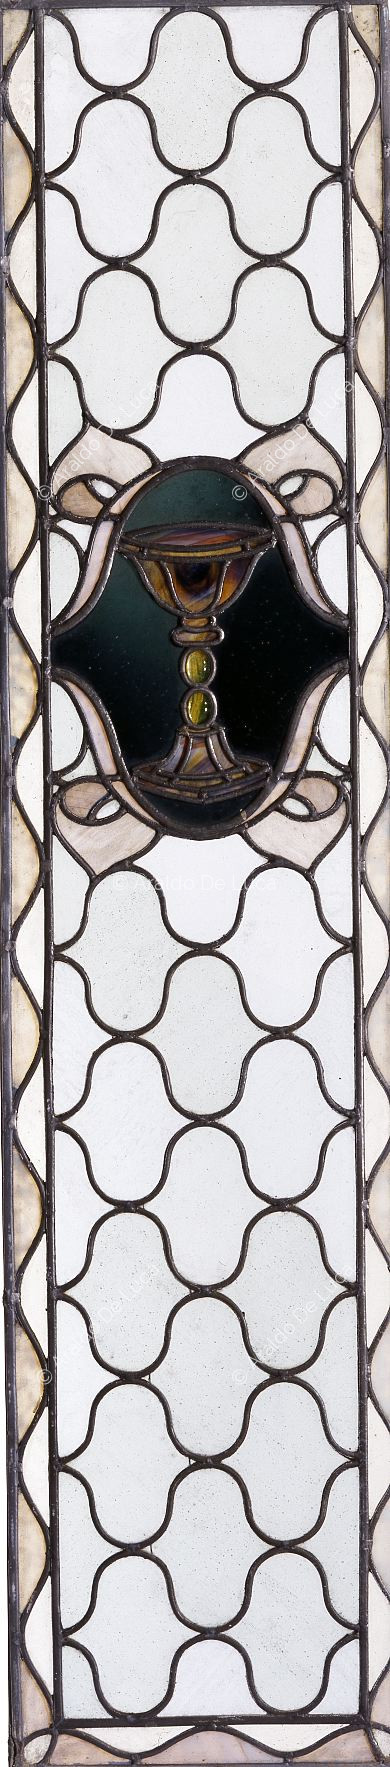 Stained glass with geometric motif and cup